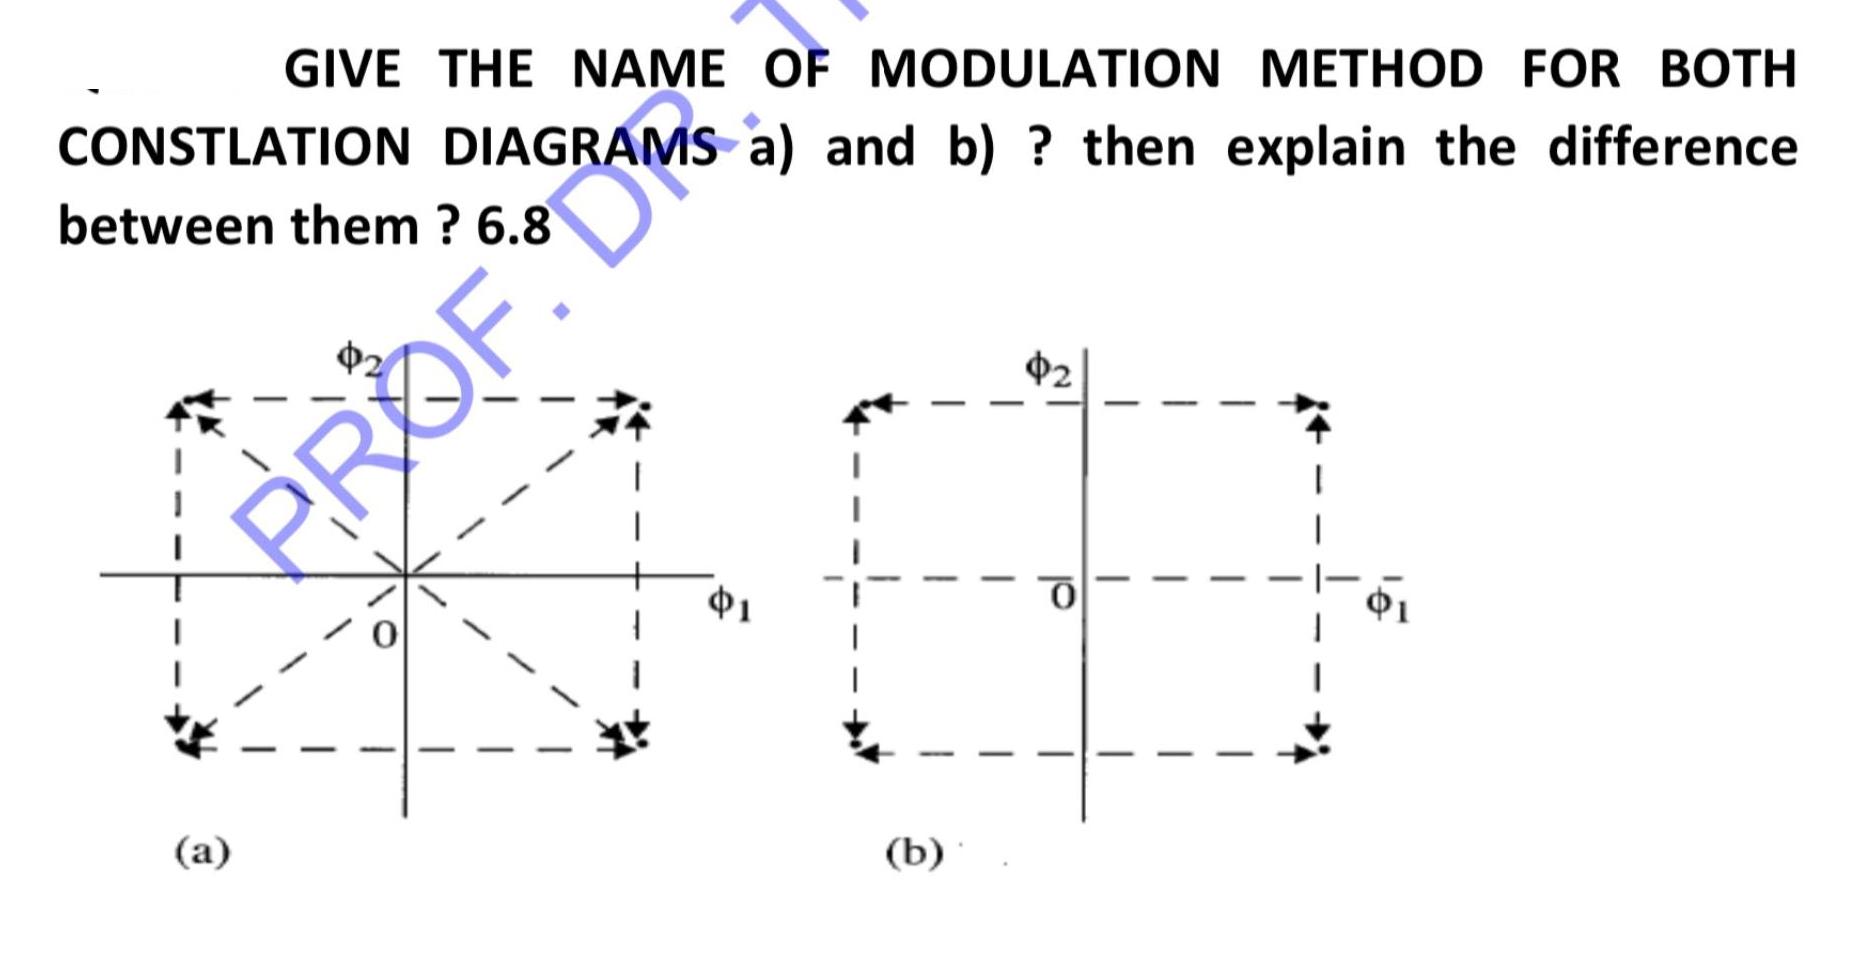 GIVE THE NAME OF MODULATION METHOD FOR BOTH CONSTLATION DIAGRAMS a) and b) ? then explain the difference